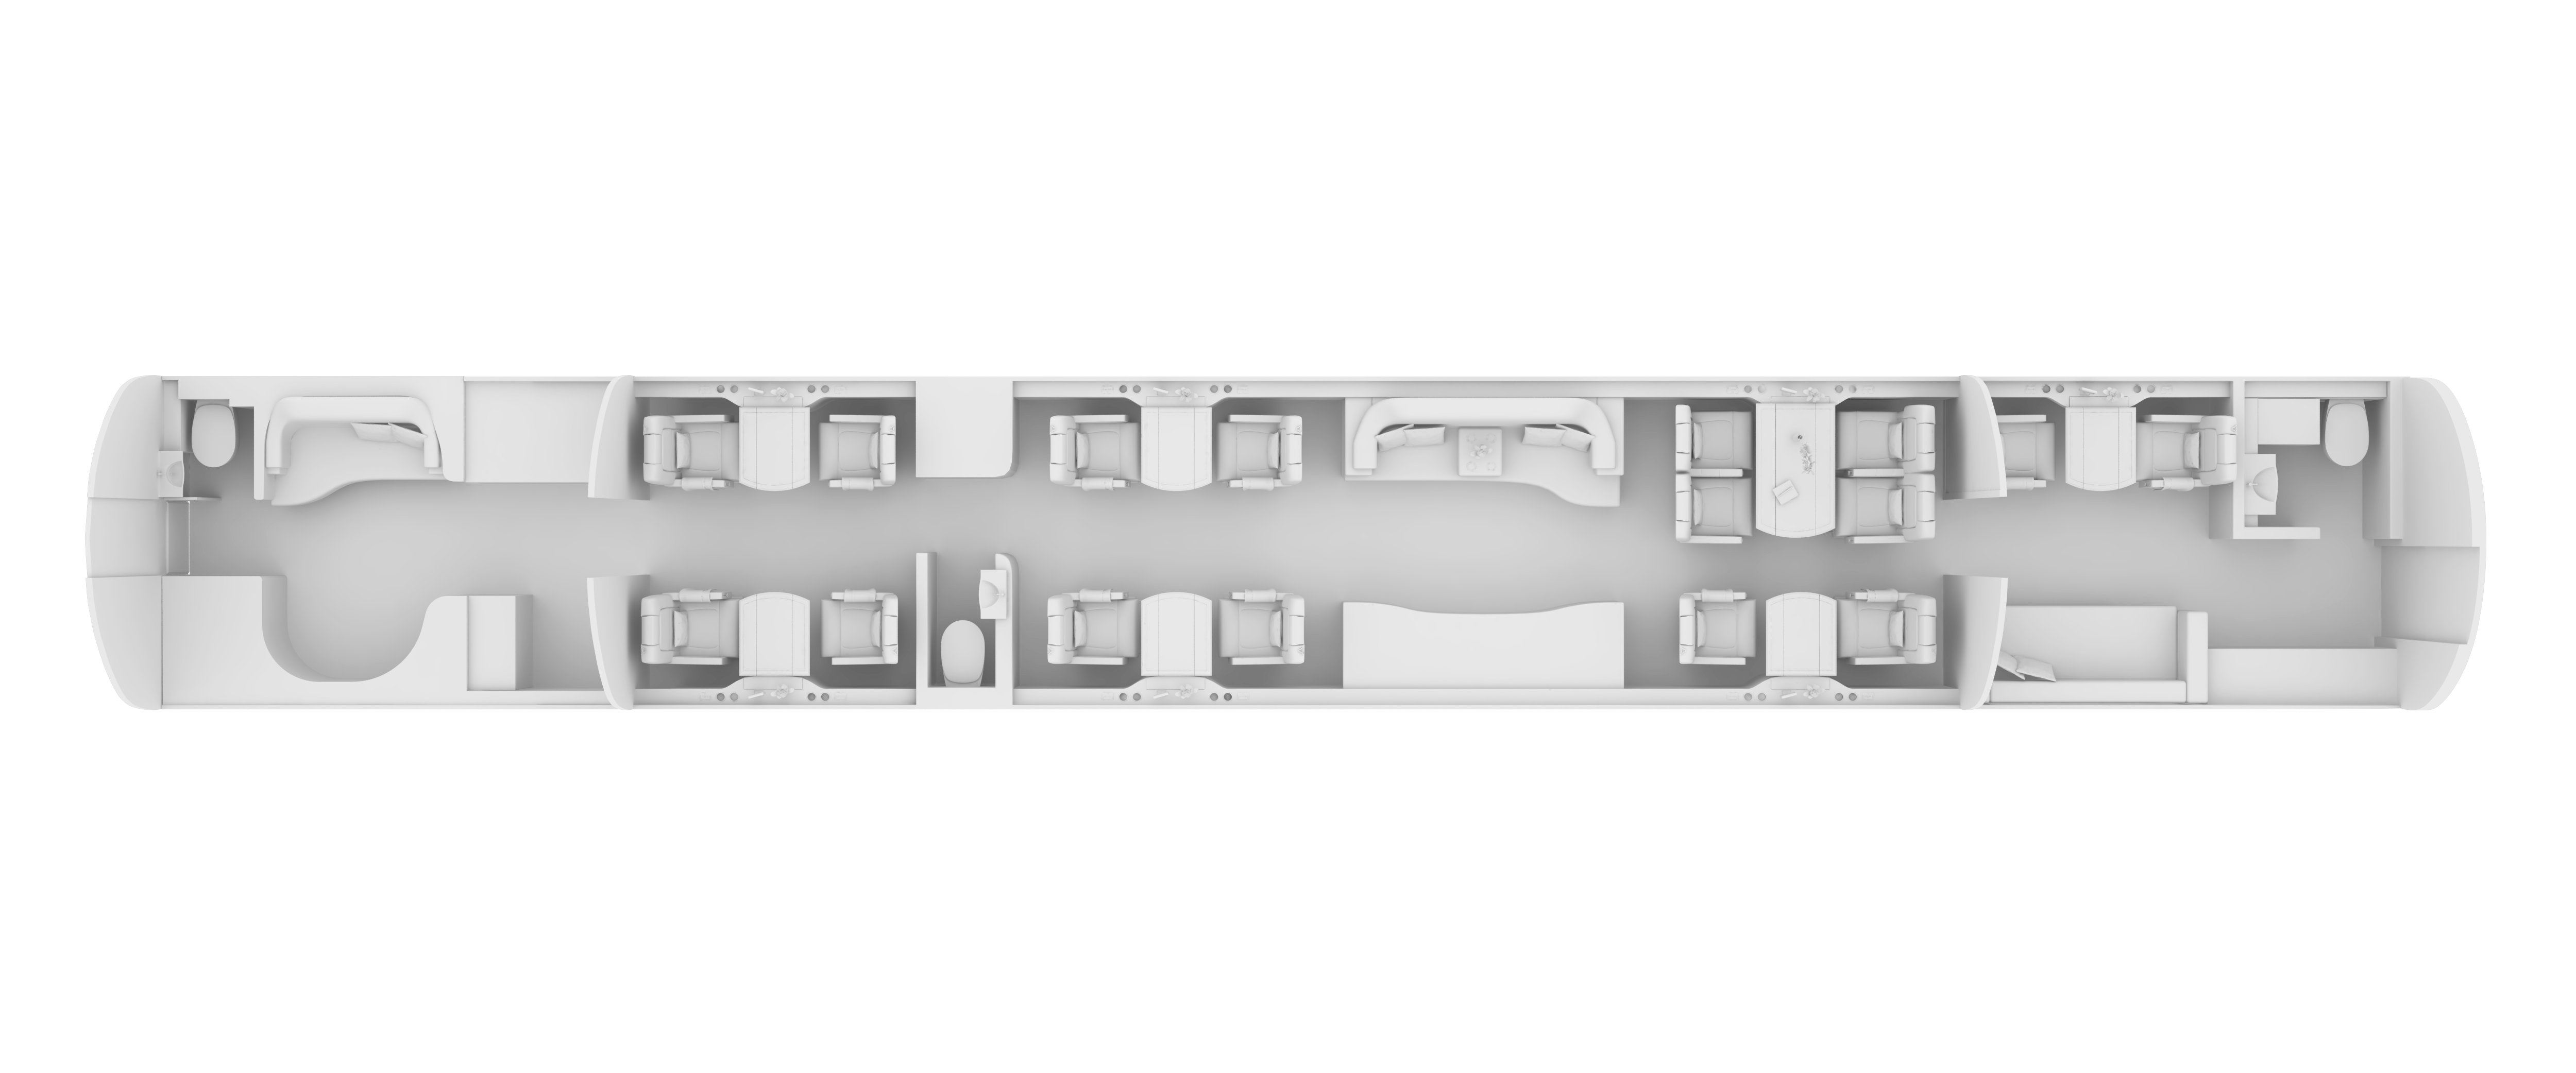 Embraer Lineage 1000 layout